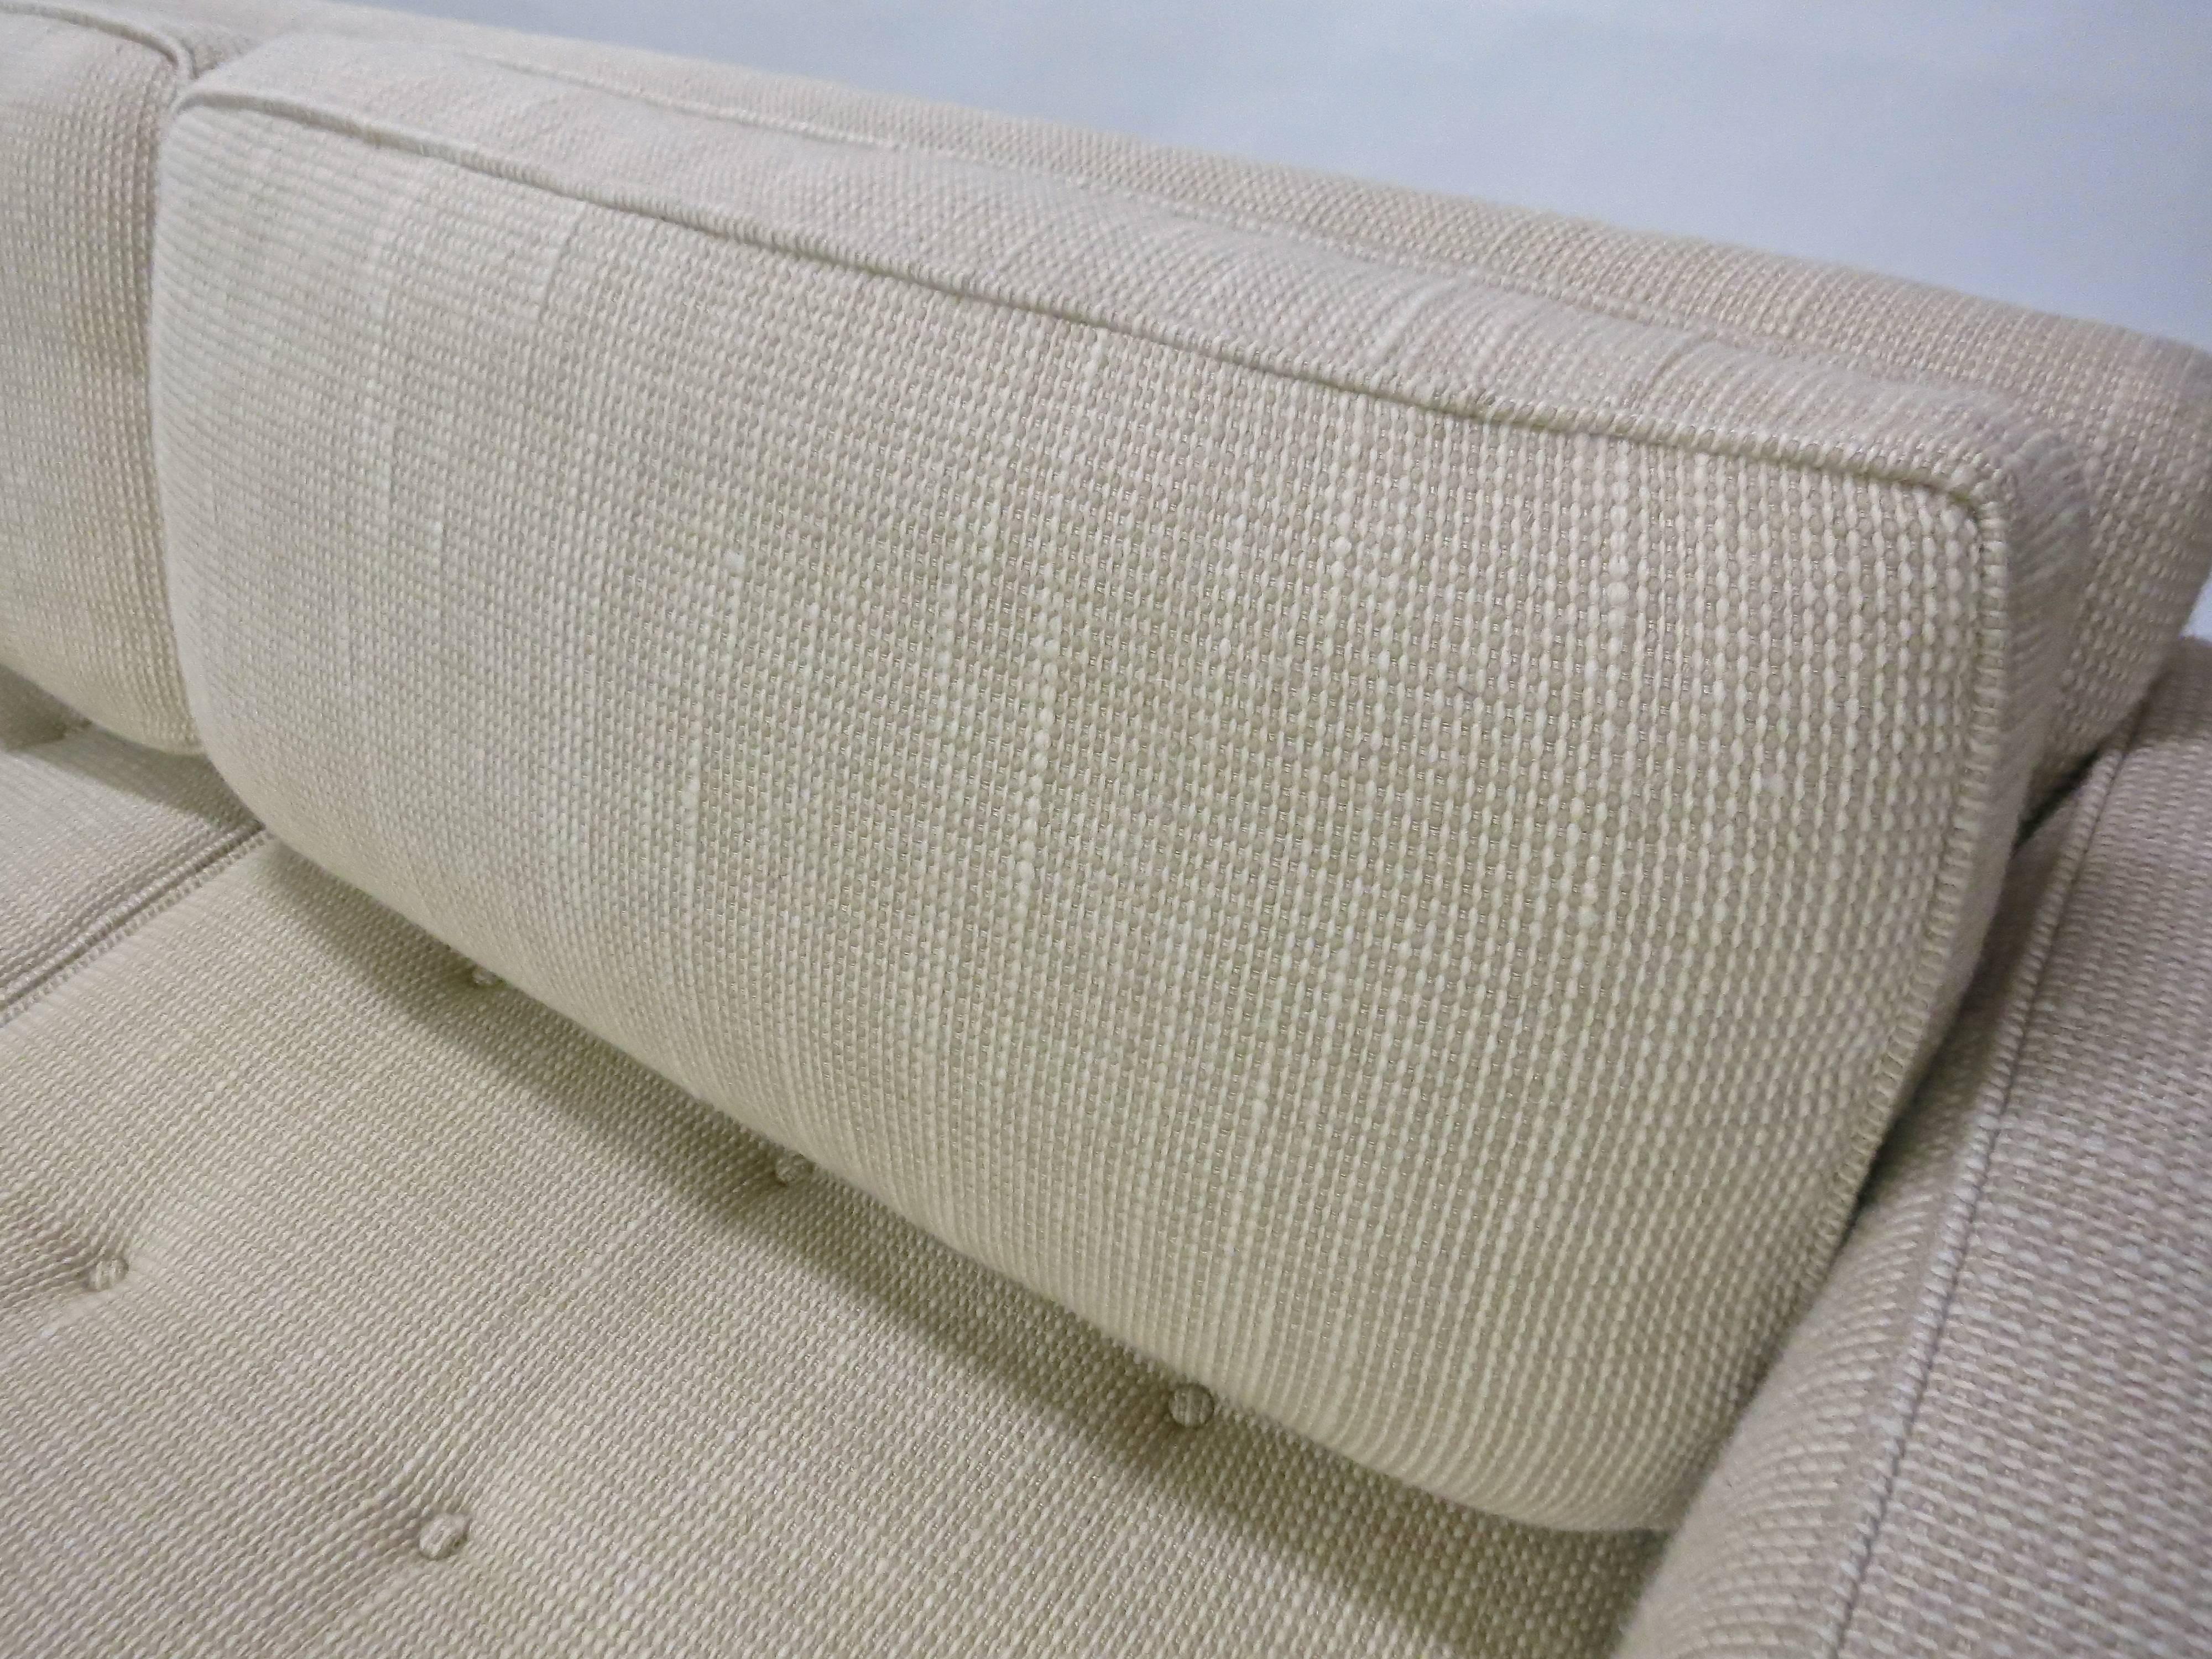 American Sofa by Charles Pfister for Knoll, Original Fabric circa 1960 Made in USA